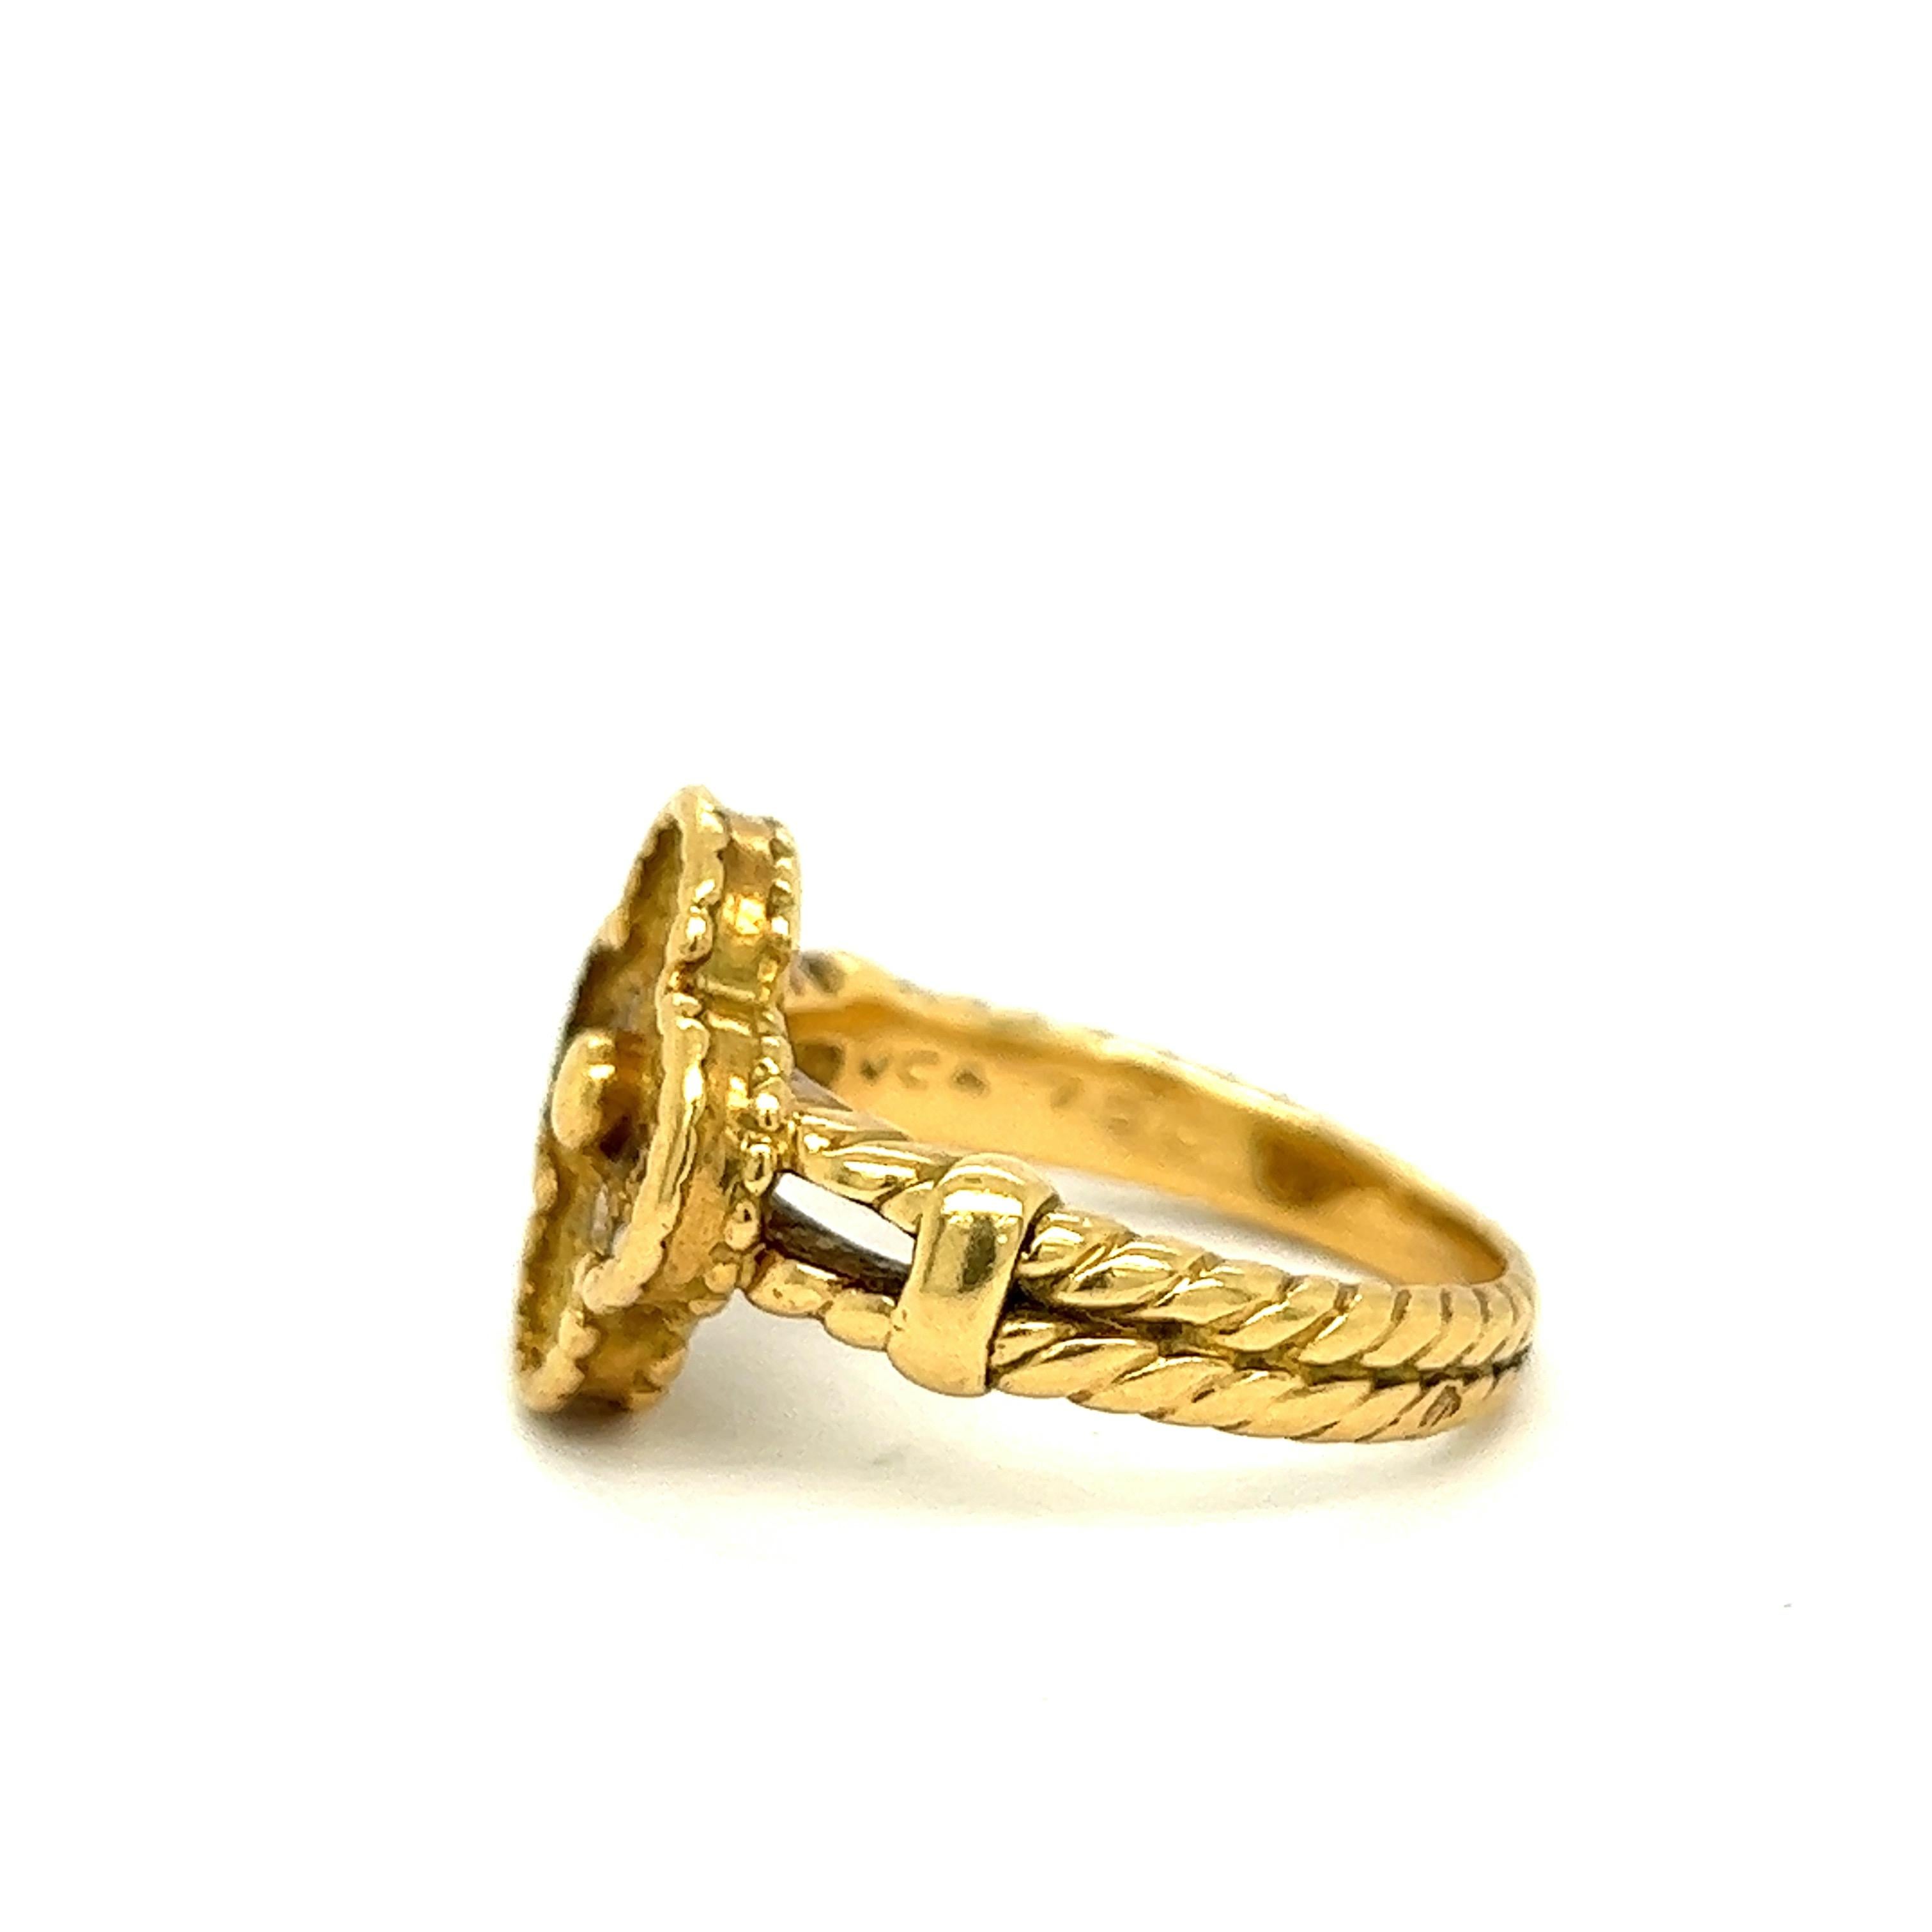 Van Cleef & Arpels Alhambra 18k Yellow Gold Diamond Ring In Good Condition For Sale In New York, NY